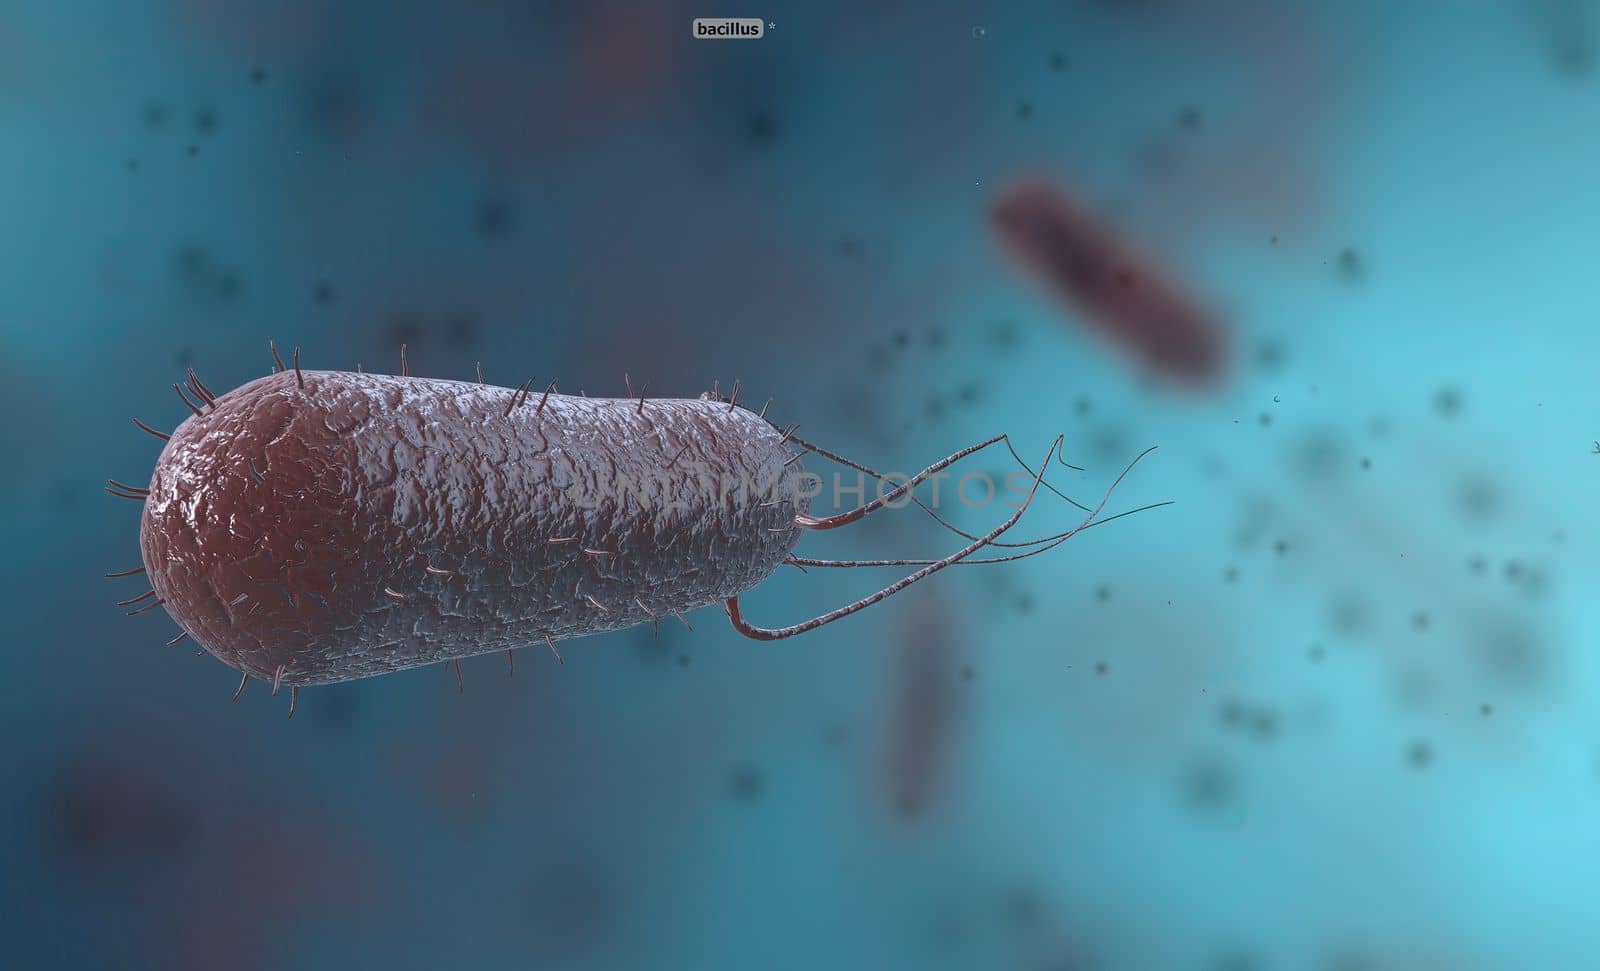 Bacillus is a gram-positive and spore-forming bacterium in the form of rods or rods. by creativepic